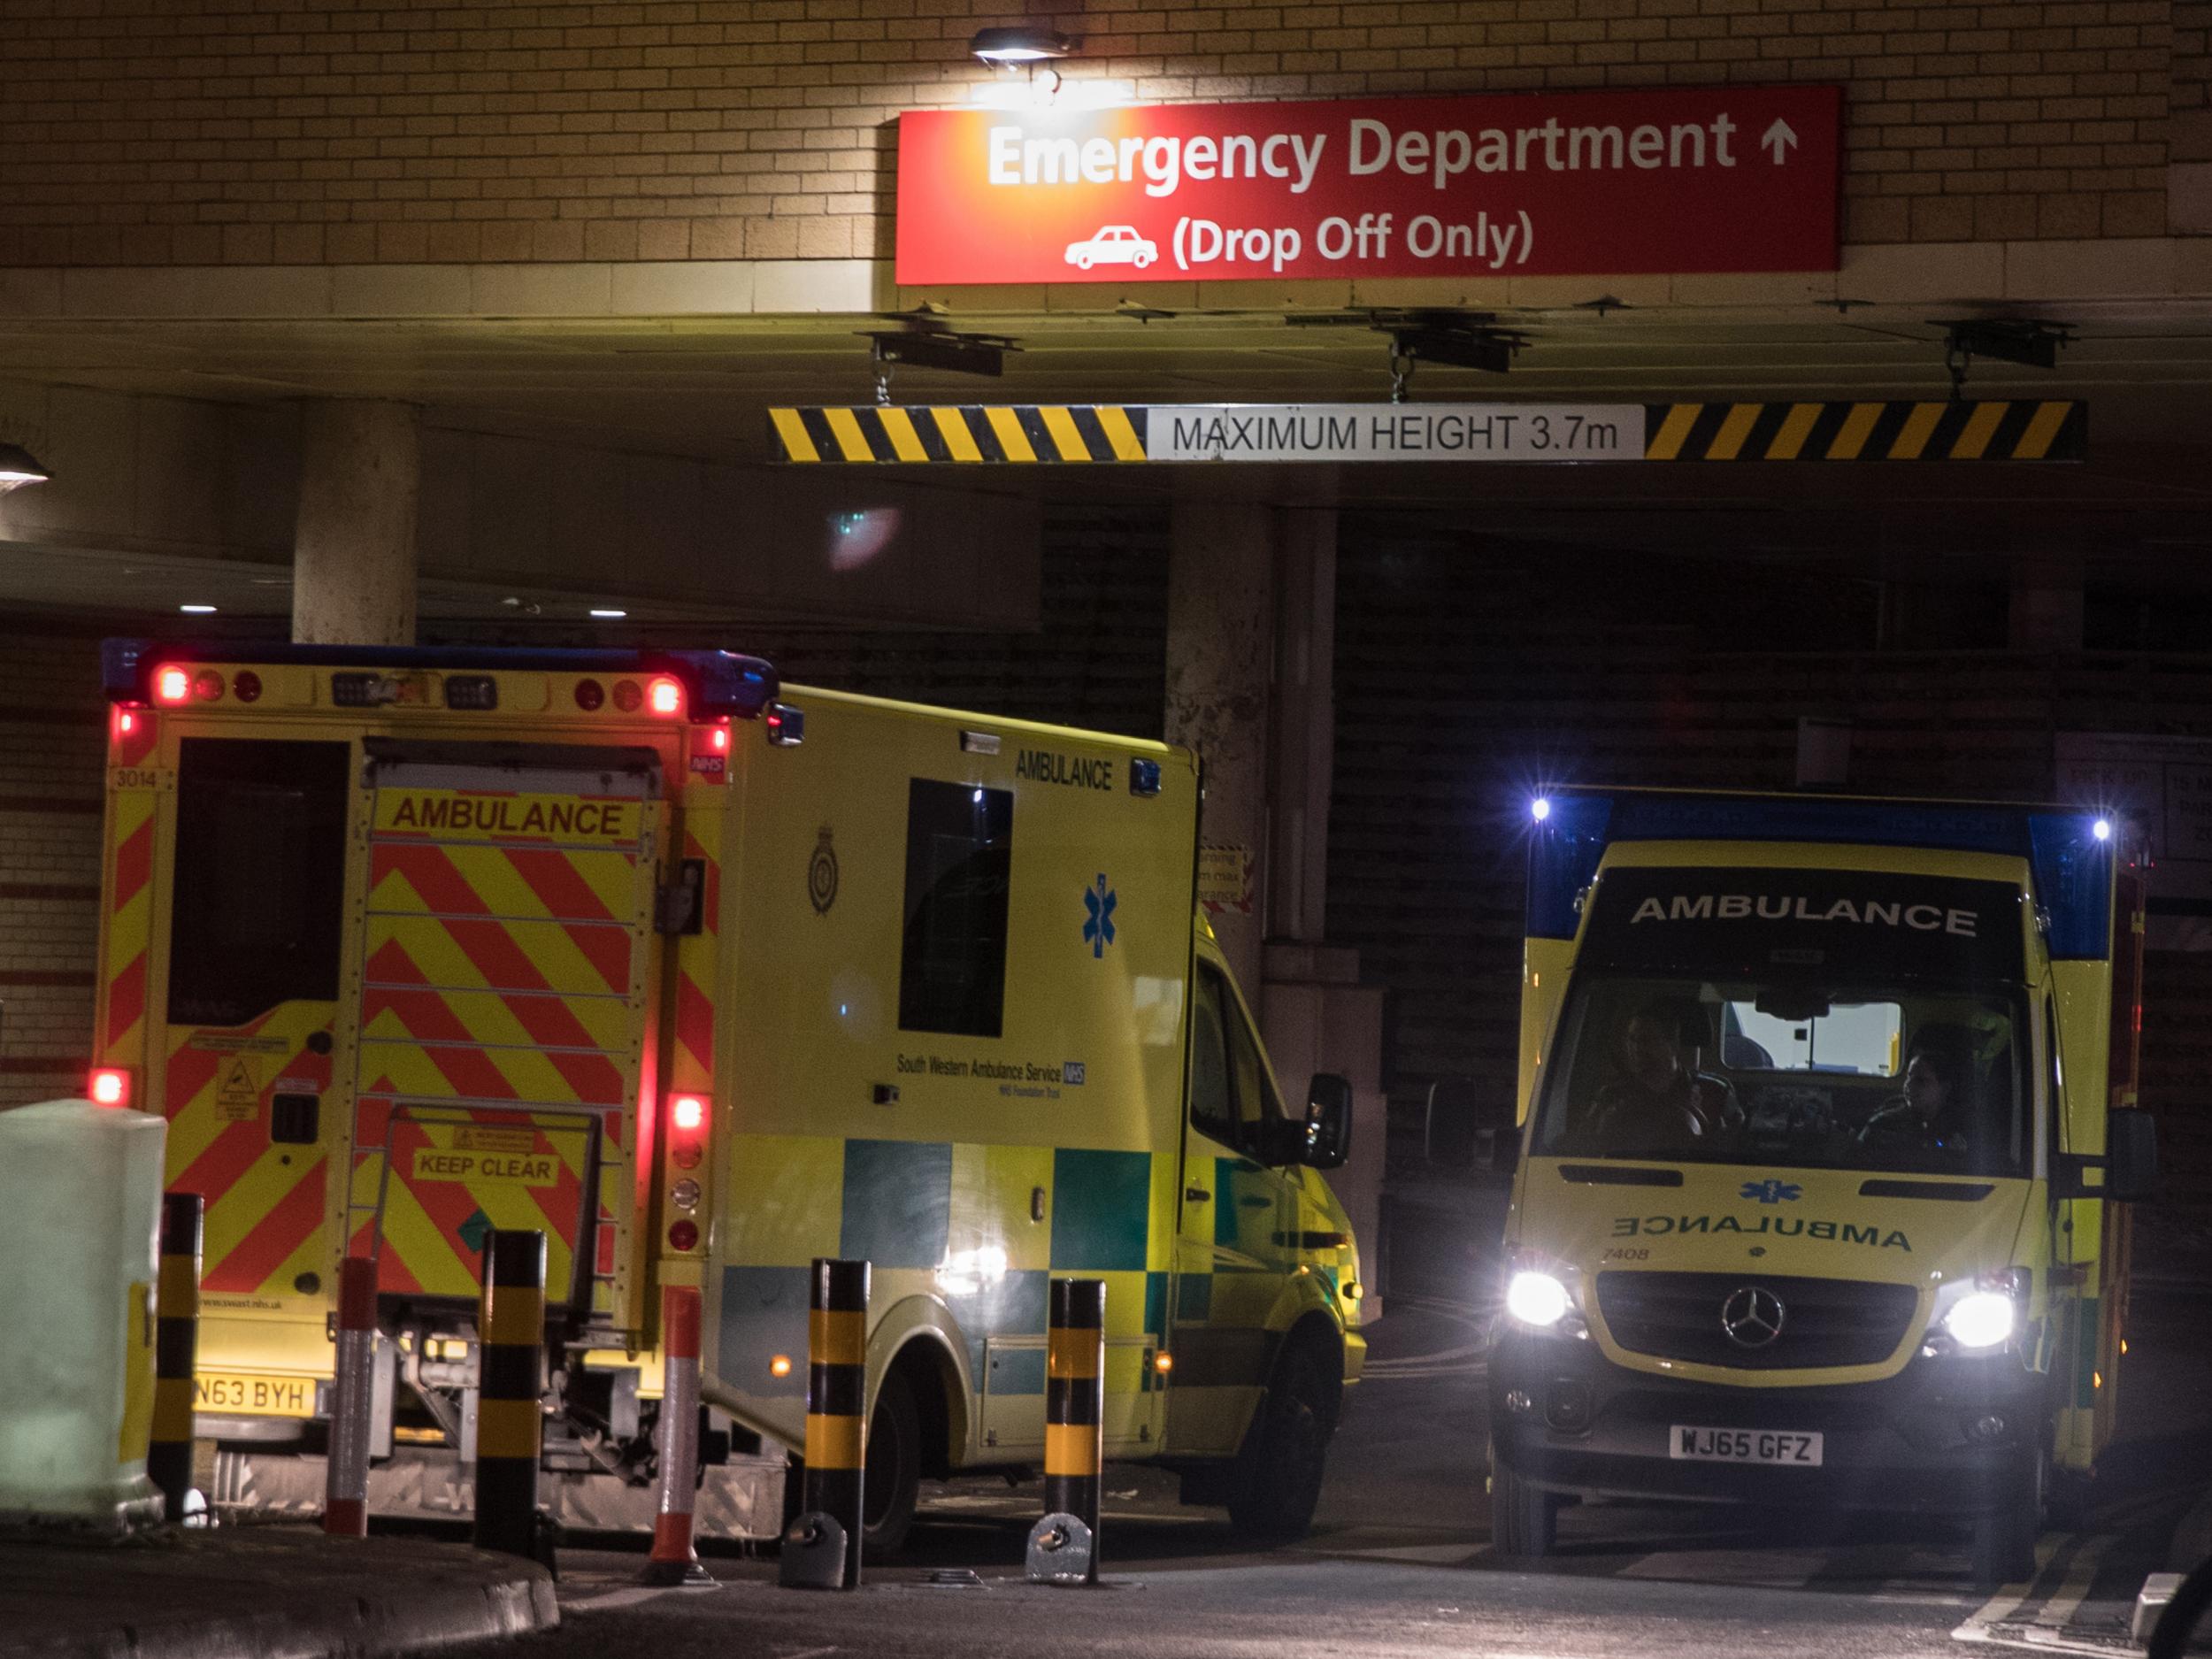 Many patients have been left waiting in ambulances due to lack of capacity in A&E